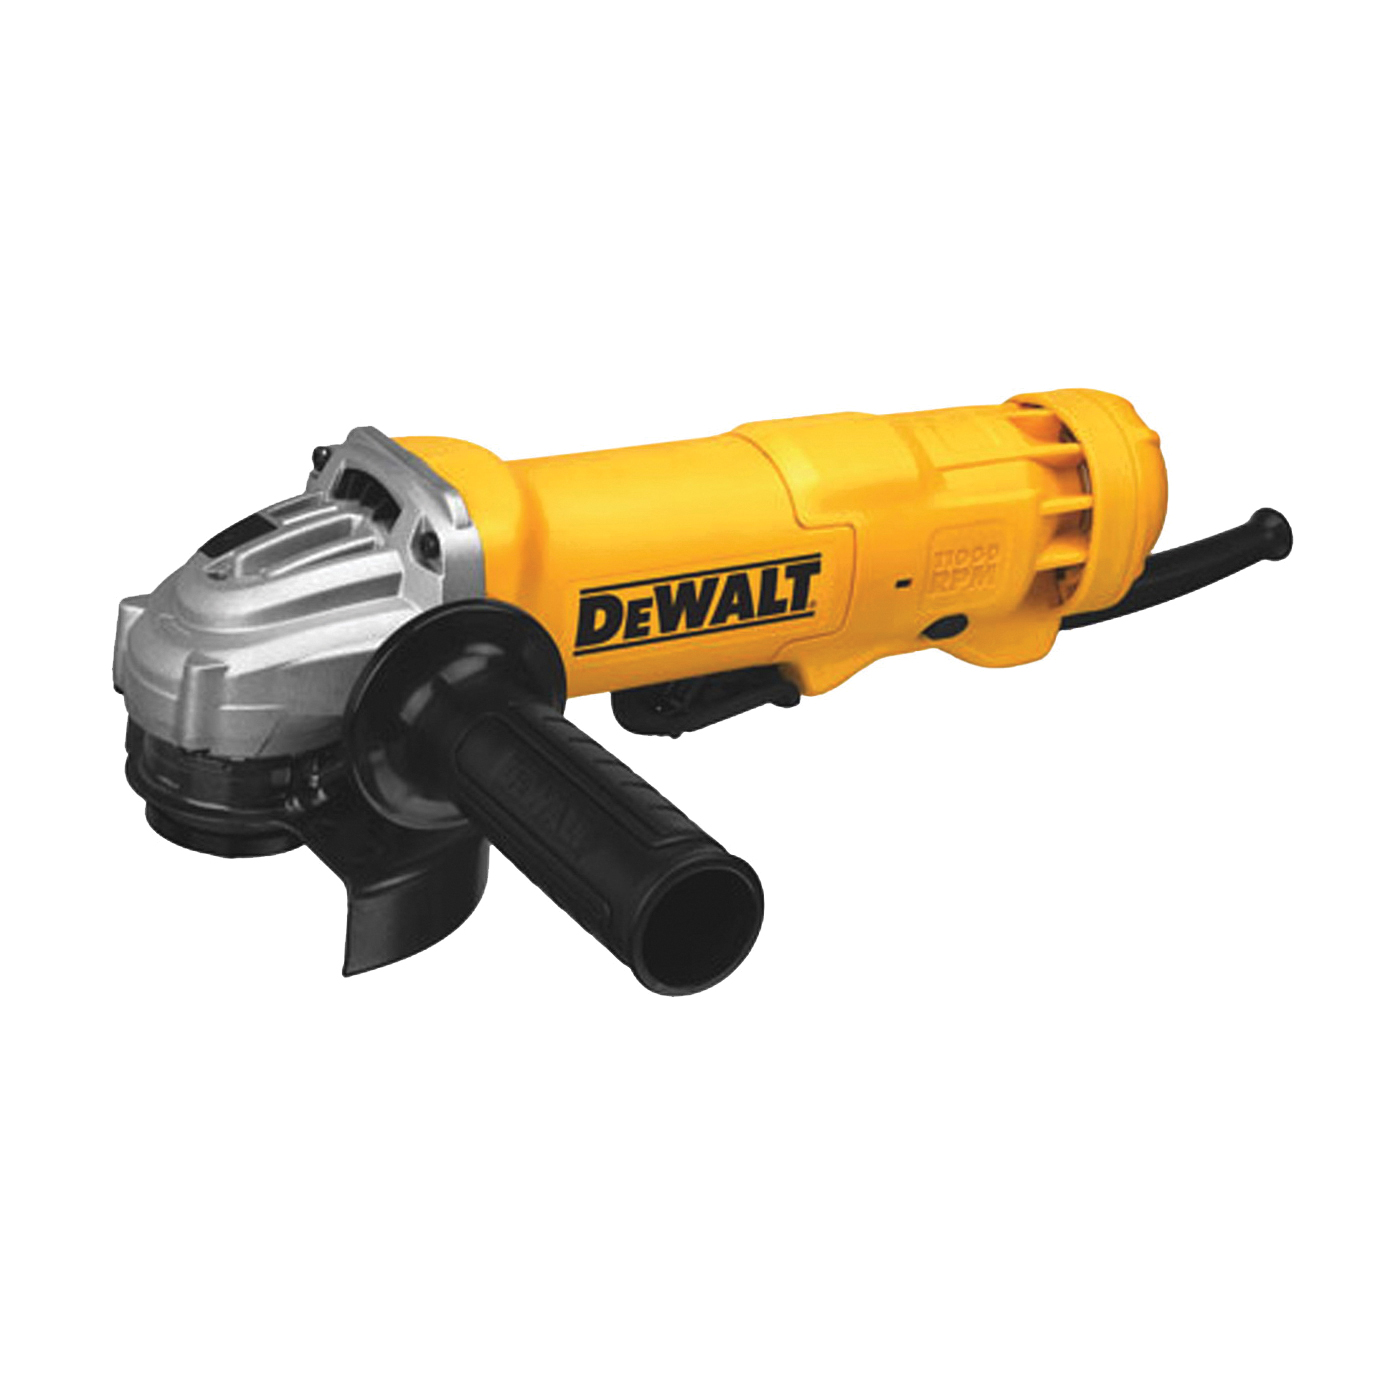 DeWALT DWE402 Small Angle Grinder, 11 A, 5/8-11 Spindle, 4-1/2 in Dia Wheel, 11,000 rpm Speed - 1